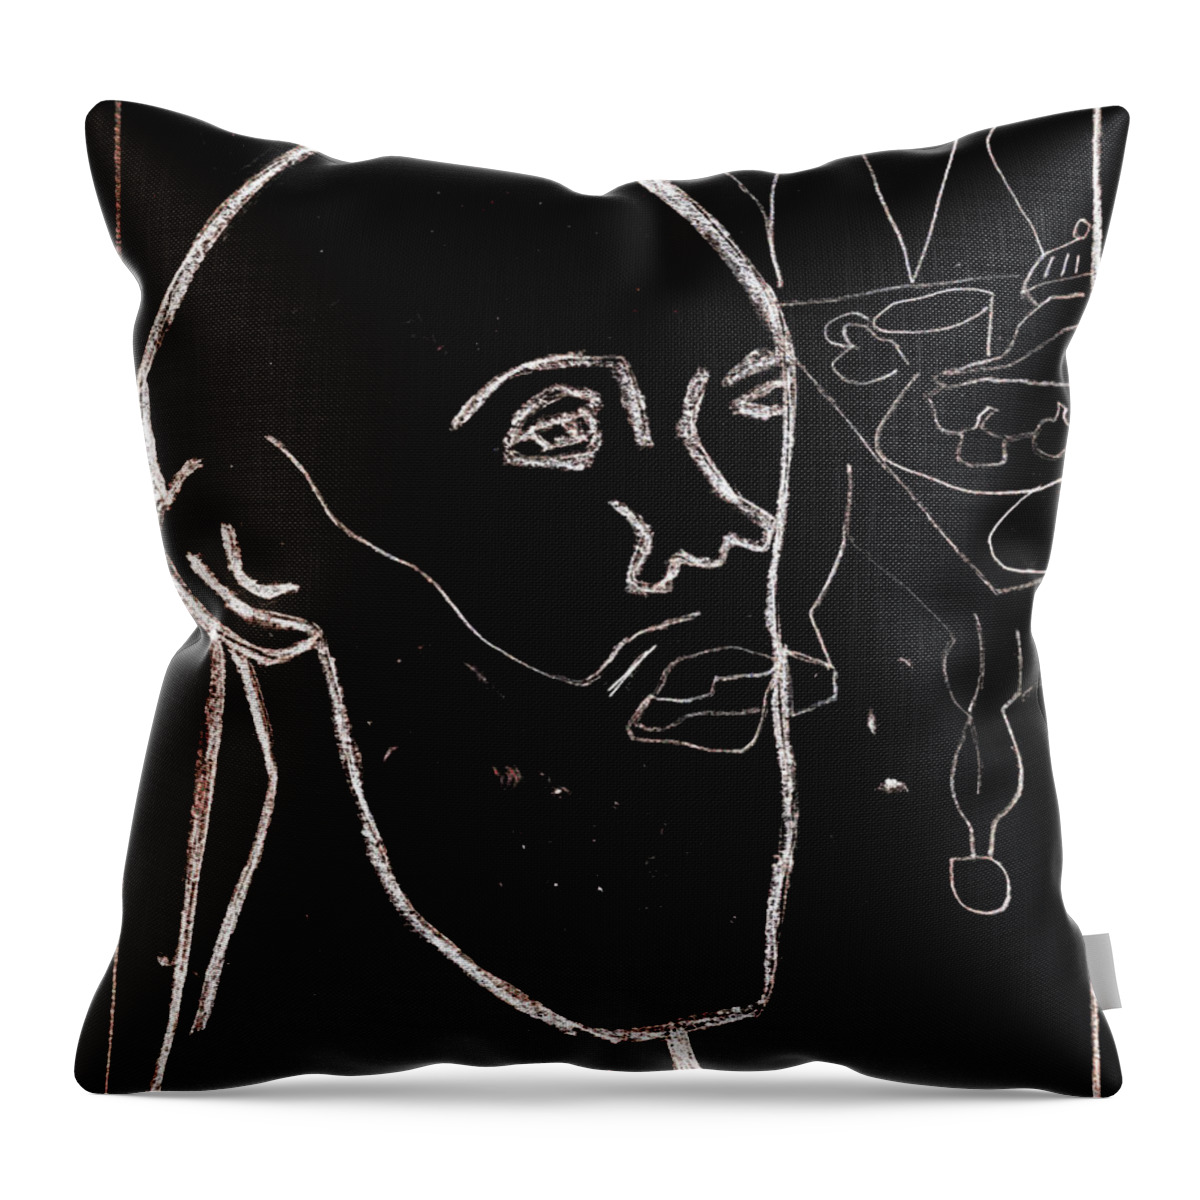 Artwork Done After Esais Table. A Nathan Yungerberg Play. Throw Pillow featuring the digital art Esais Table 3 by Edgeworth Johnstone